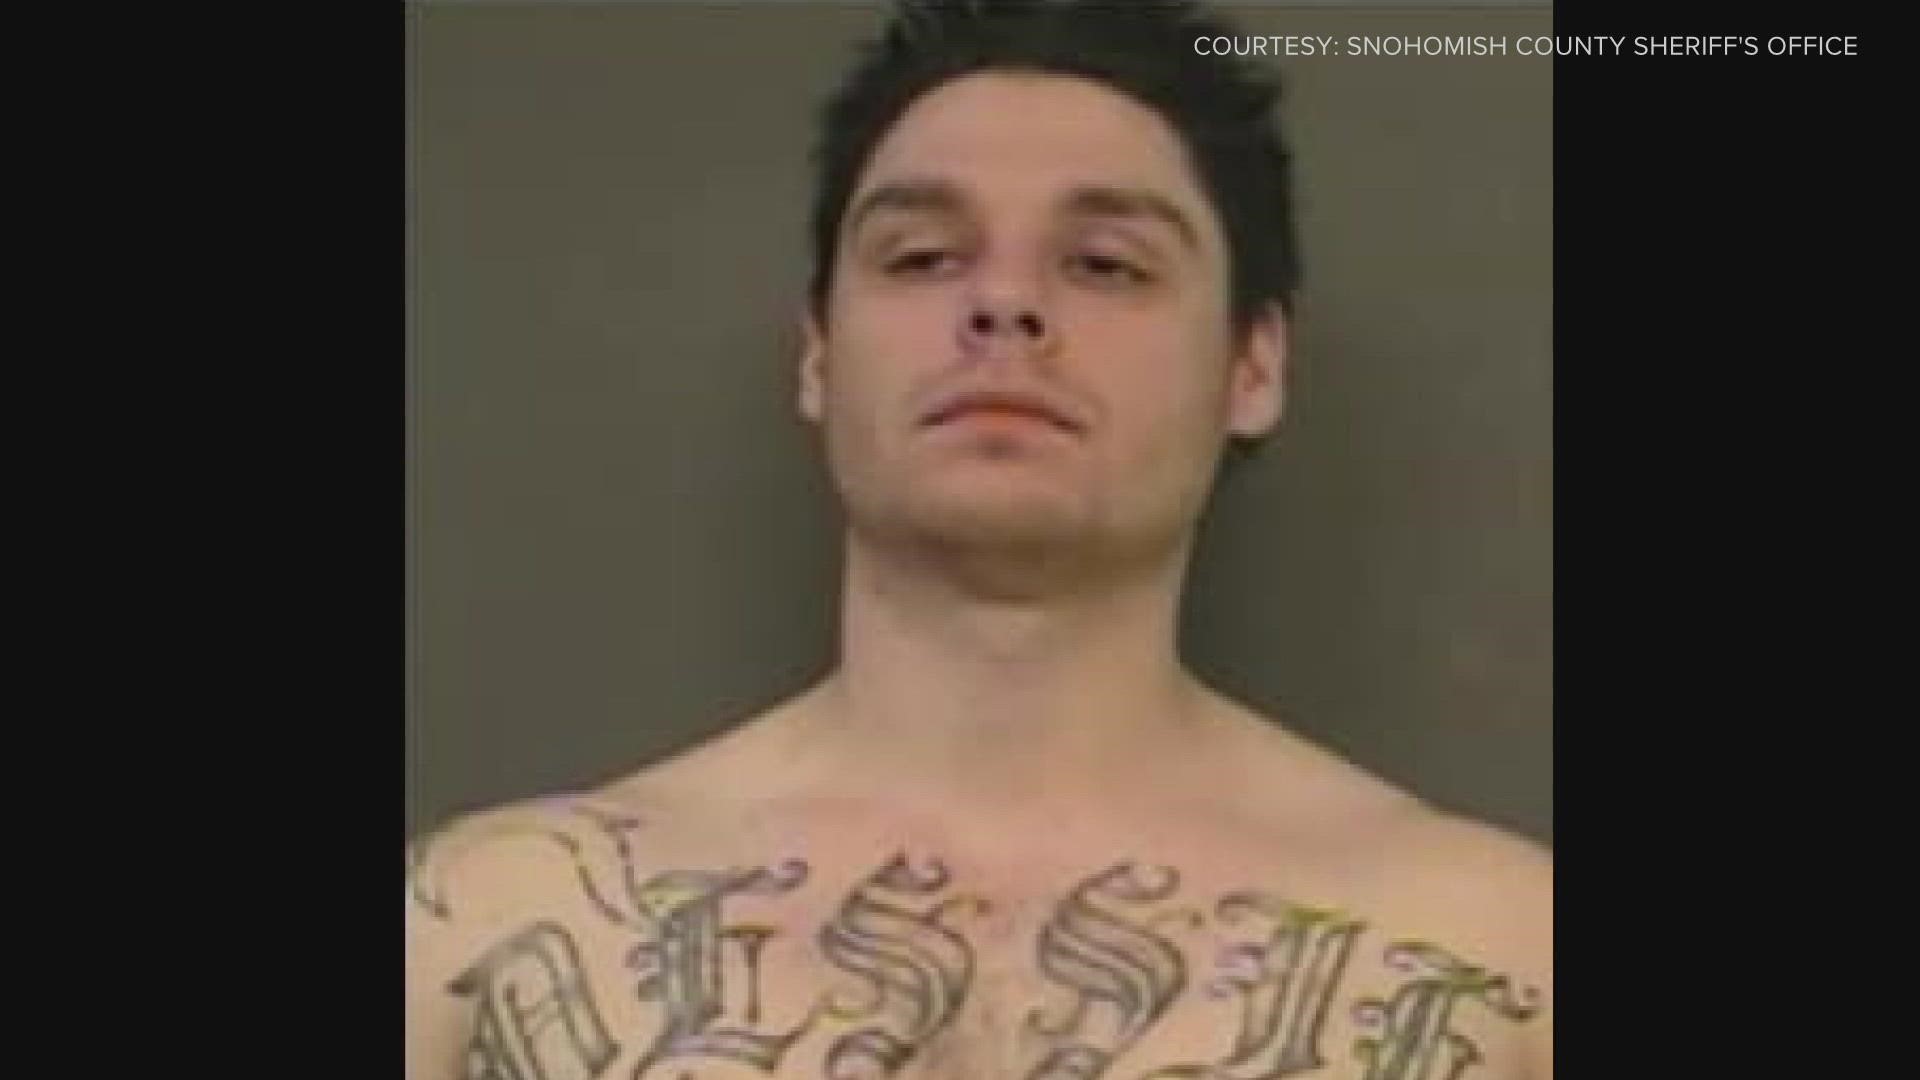 Andrew Cain Kristovich escaped from a federal prison camp in Oregon. He was arrested in Carson City, Nev., on May 13.